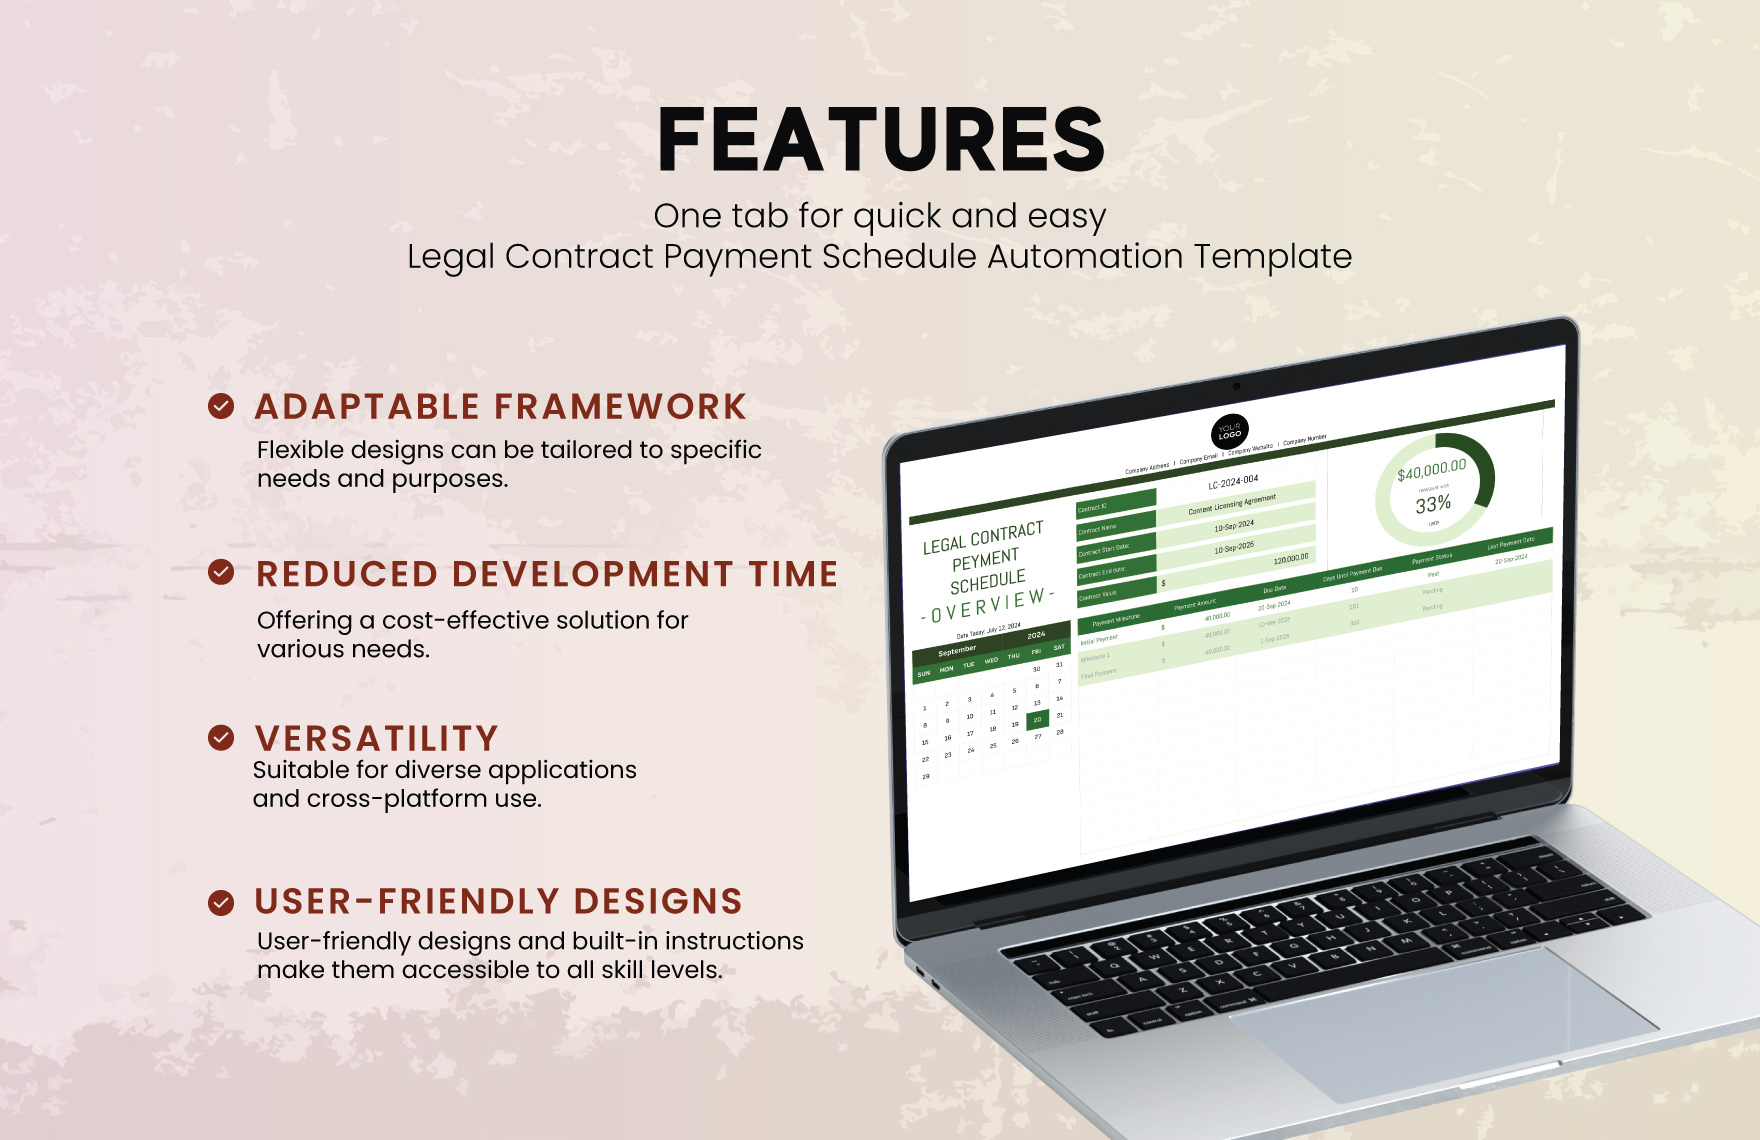 Legal Contract Payment Schedule Automation Template